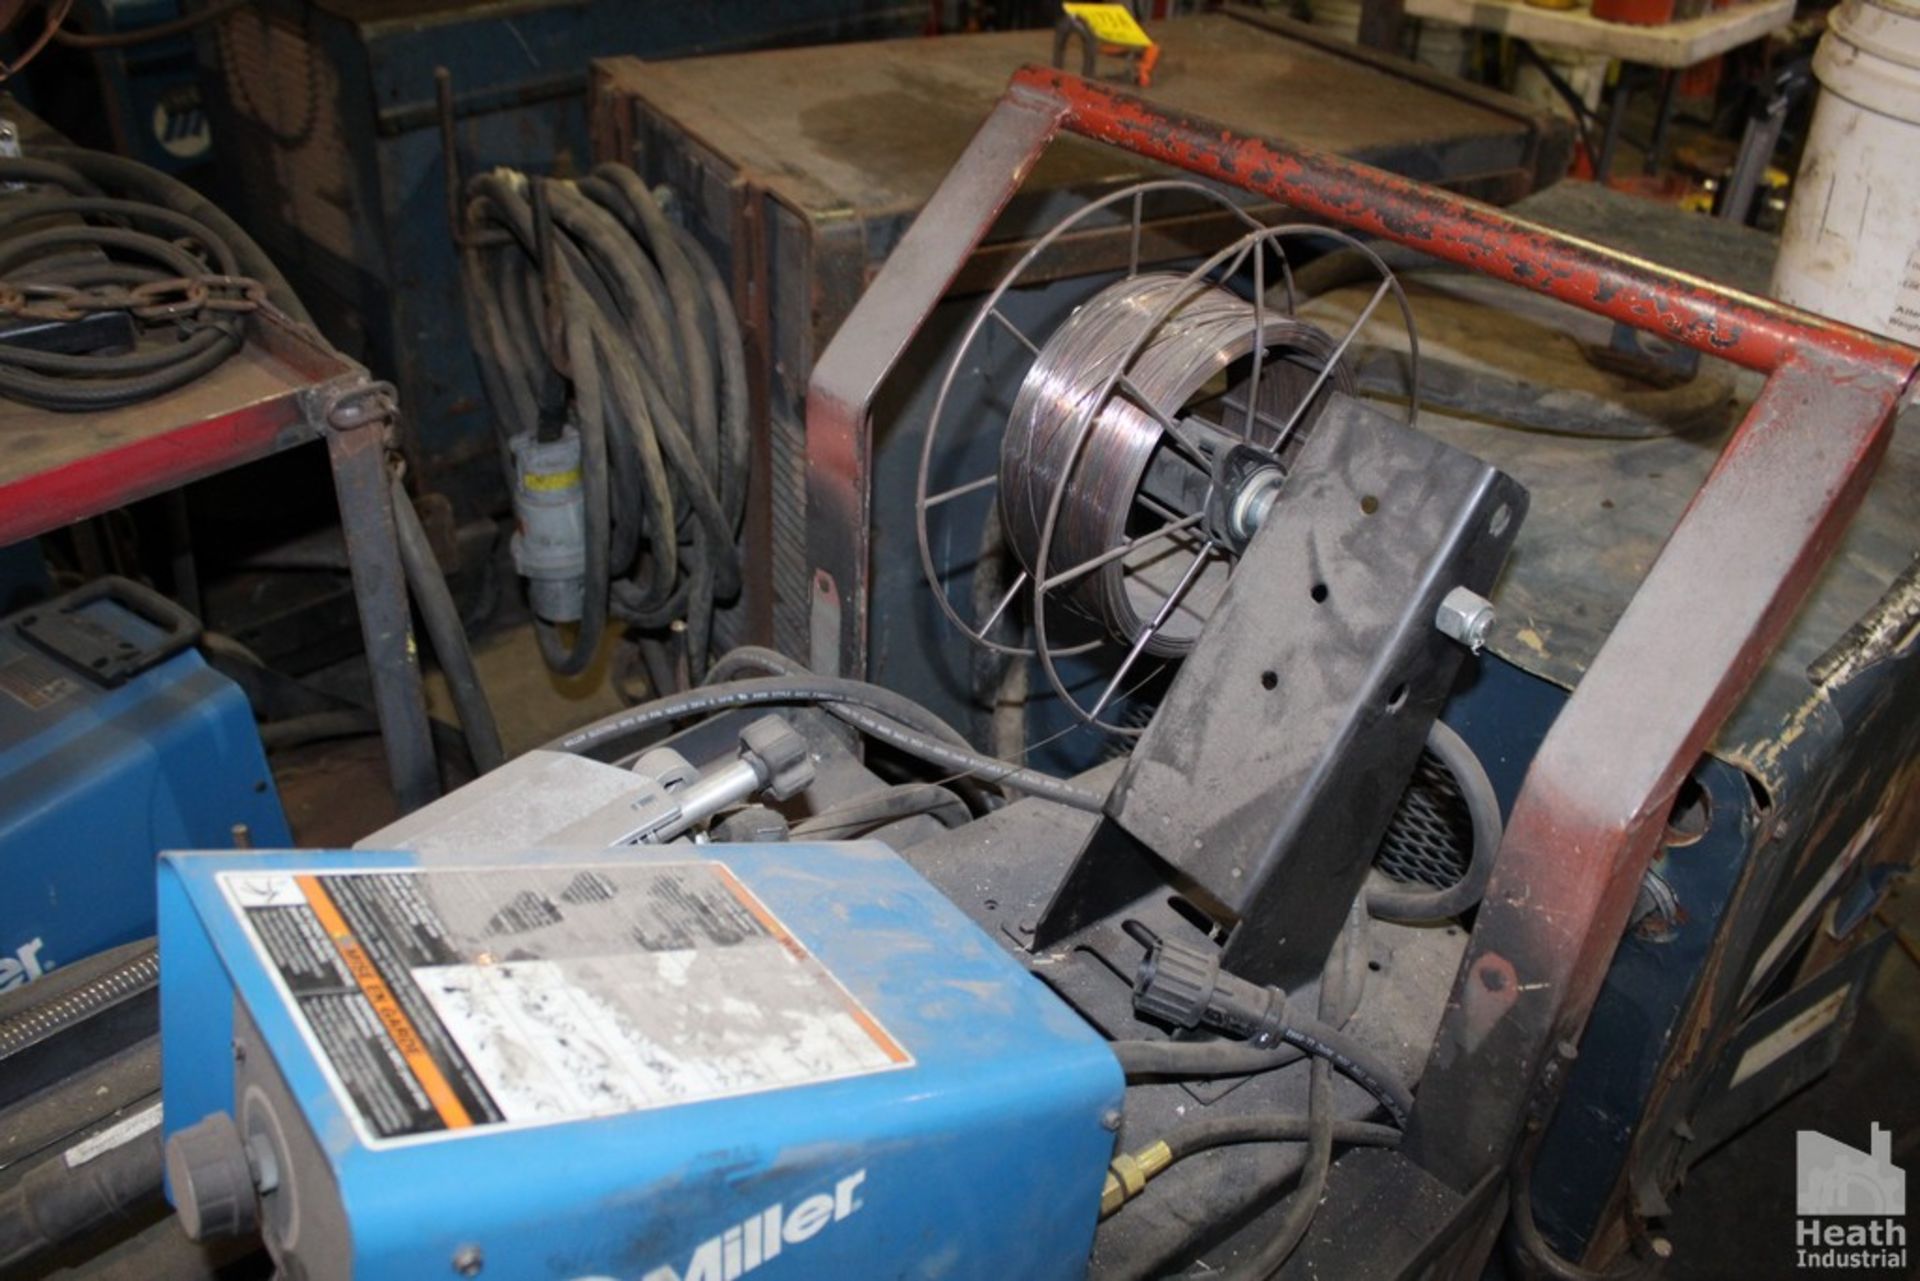 MILLER 70 SERIES 24V WIRE FEEDER WITH PORTABLE CART - Image 3 of 4